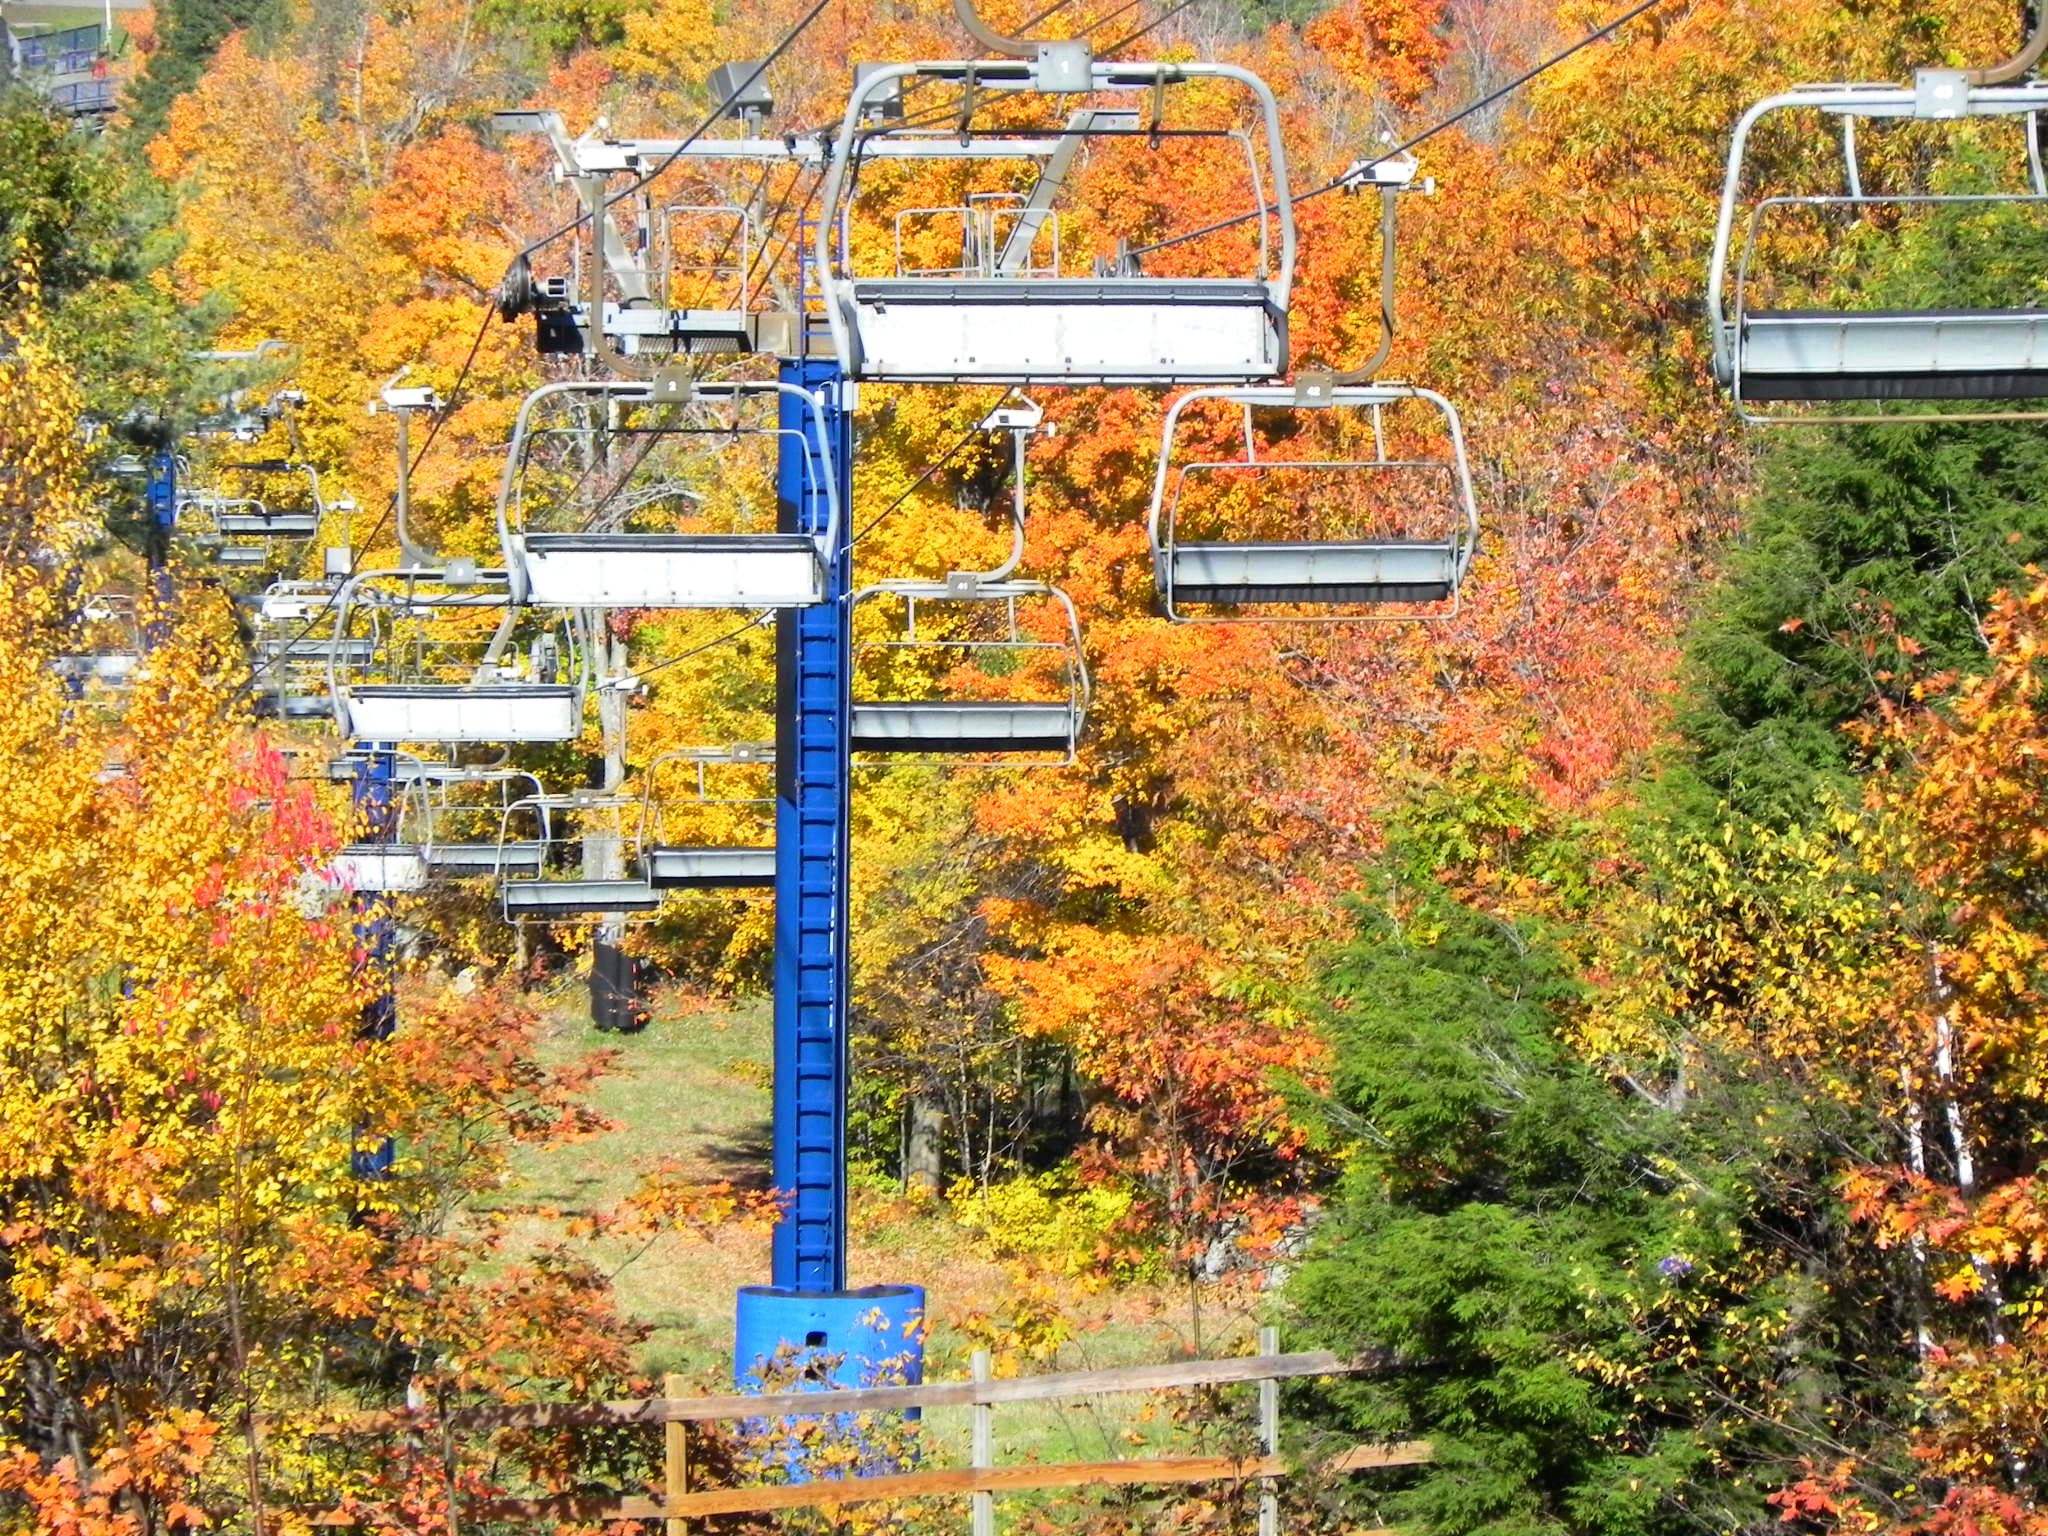 Wachusett Mountain Chairlifts In Foliage! (user submitted)